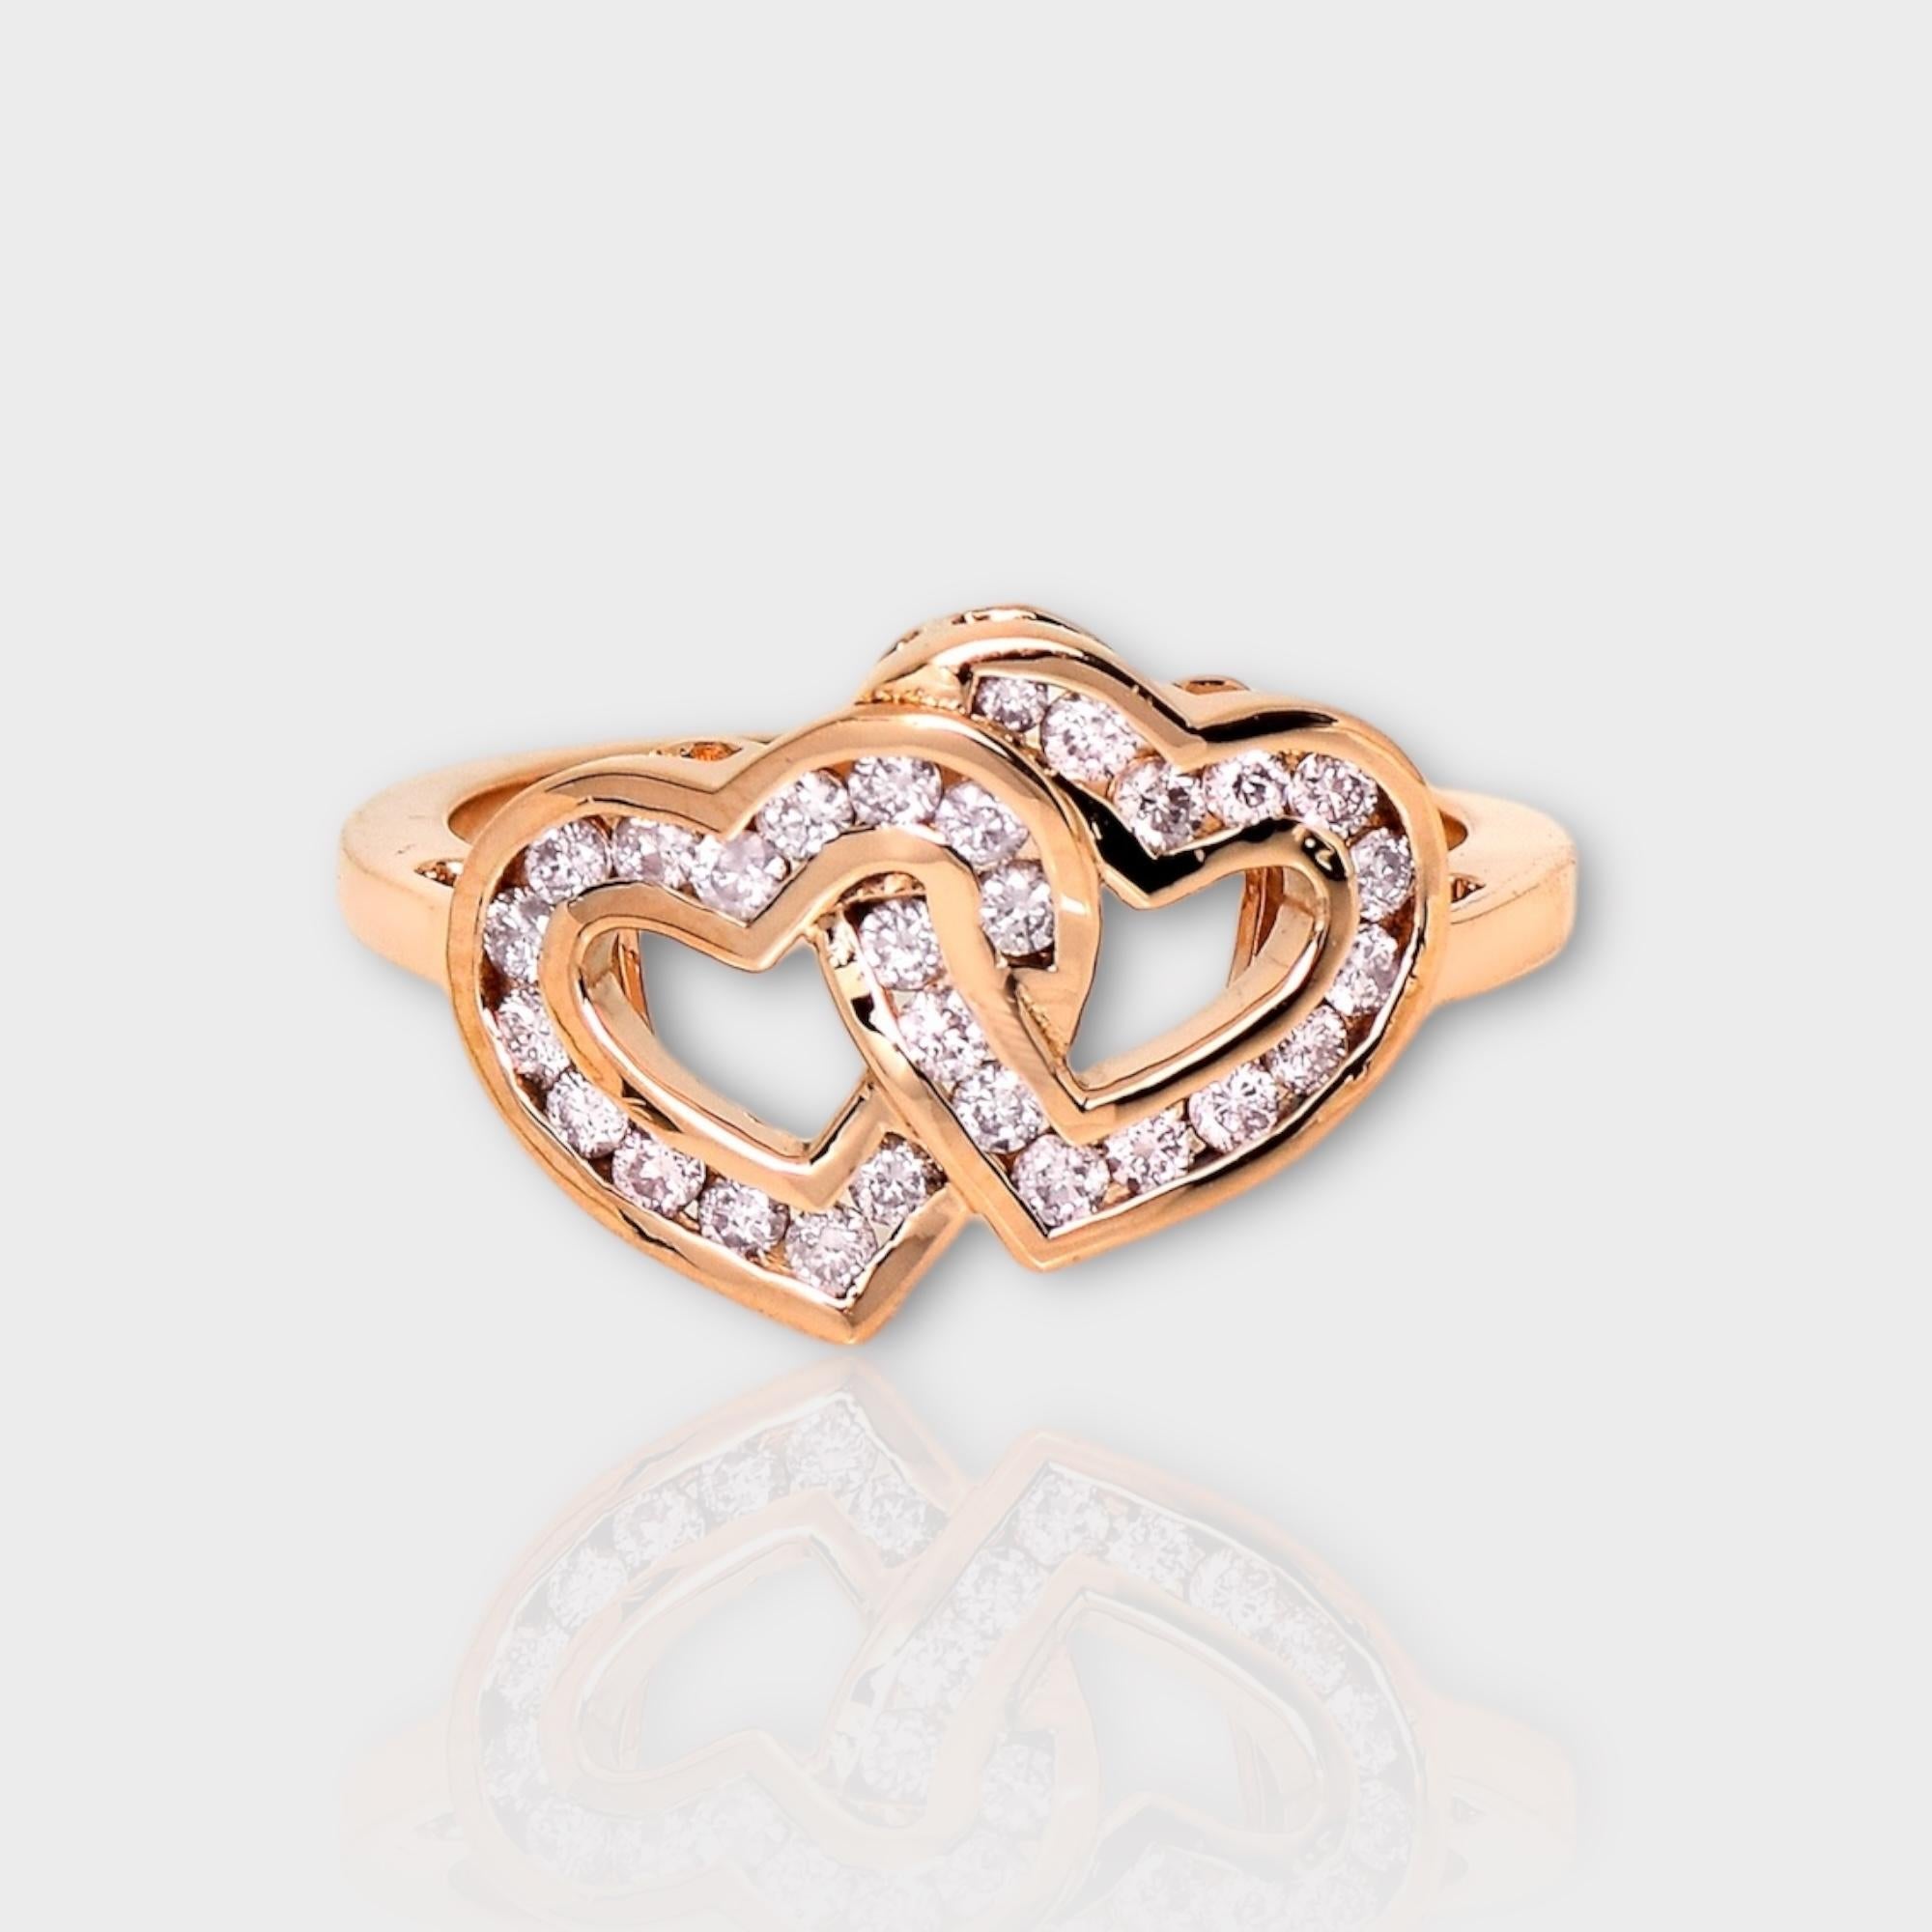 *IGI 14K 0.40 ct Natural Pink Diamonds Cross Heart Design  Antique Art Deco Ring*

This band features a stunning design with a cross heart crafted from 14K pink gold. It is set with natural pink diamonds weighing 0.40 carats.

This ring features